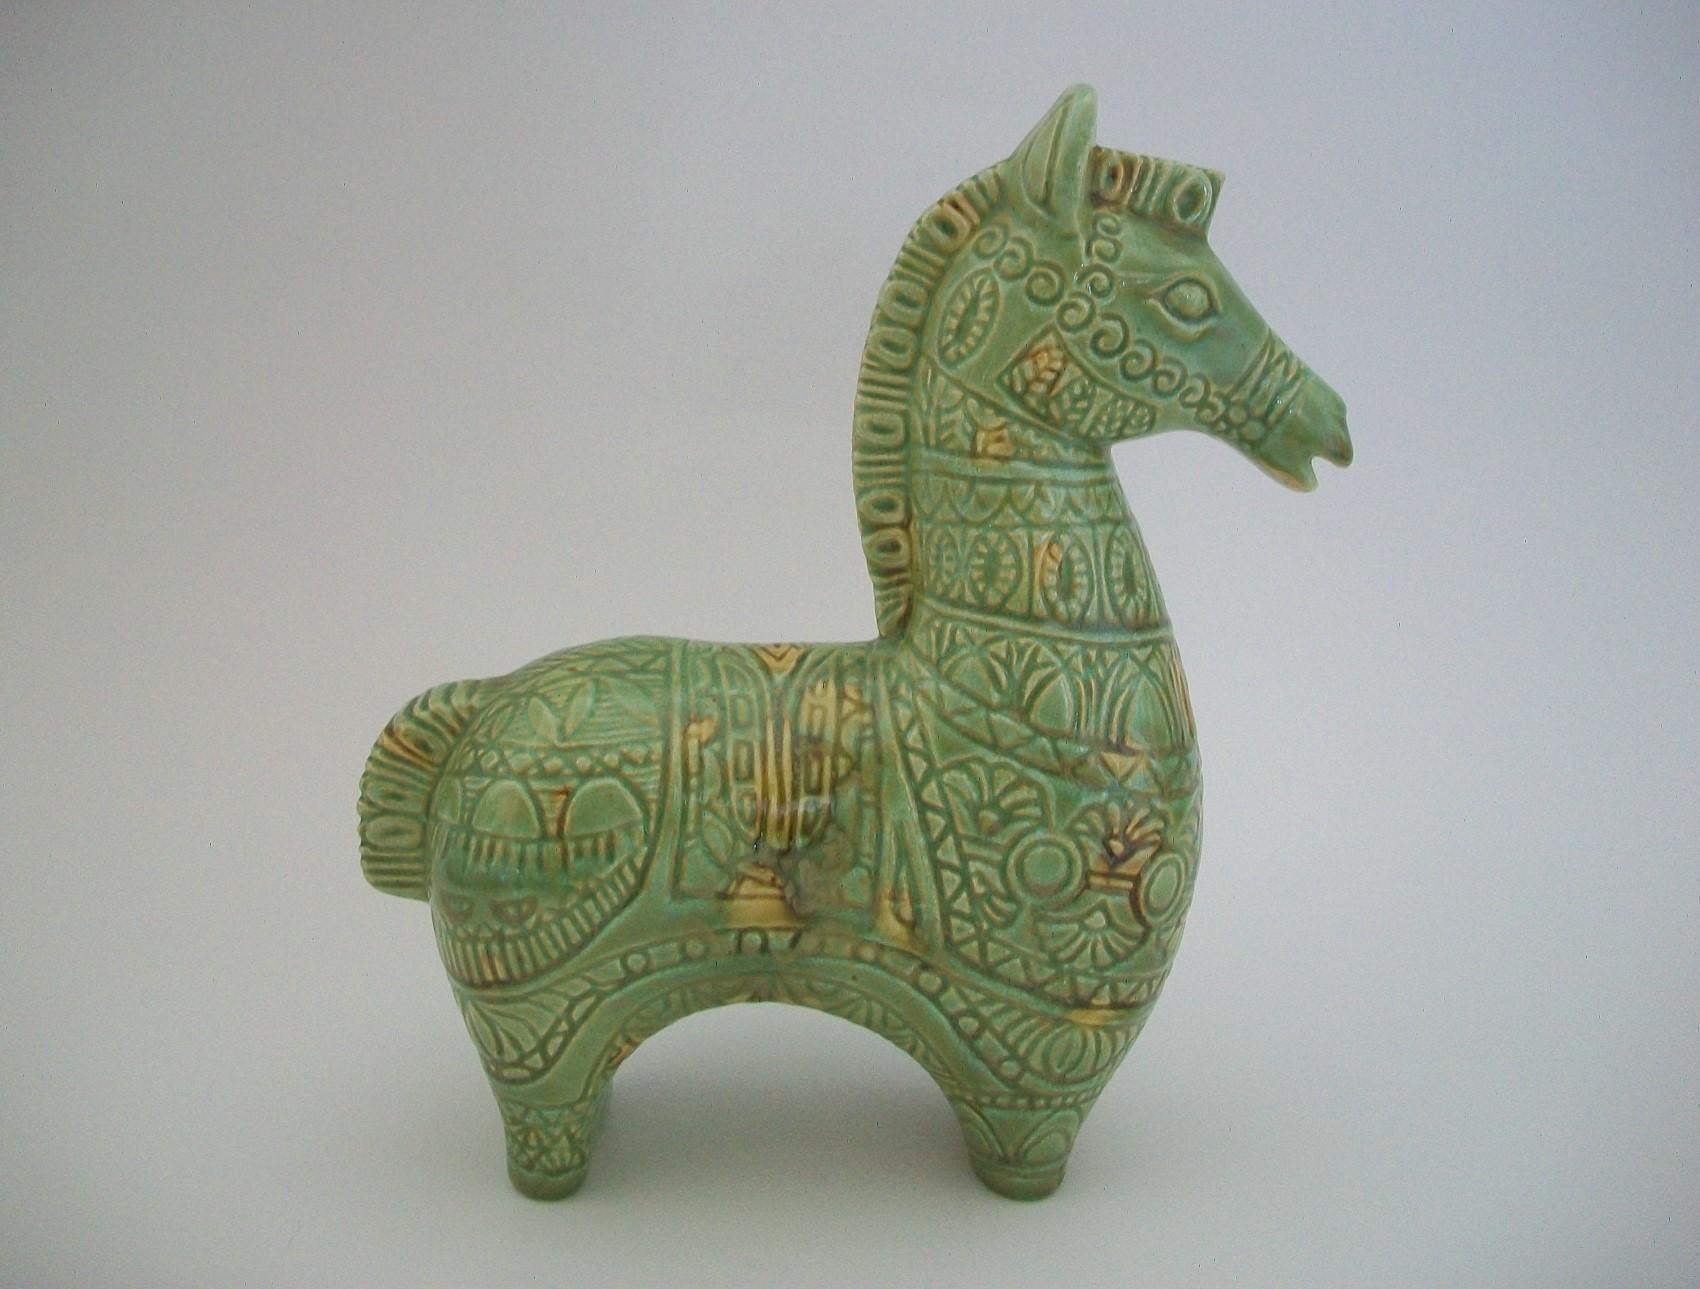 Mid Century Bitossi style studio pottery glazed ceramic Trojan horse - featuring an articulated molded form with a celadon glaze and random amber splashed highlights - unsigned - Canada (likely) - mid 20th century.

Excellent / mint vintage